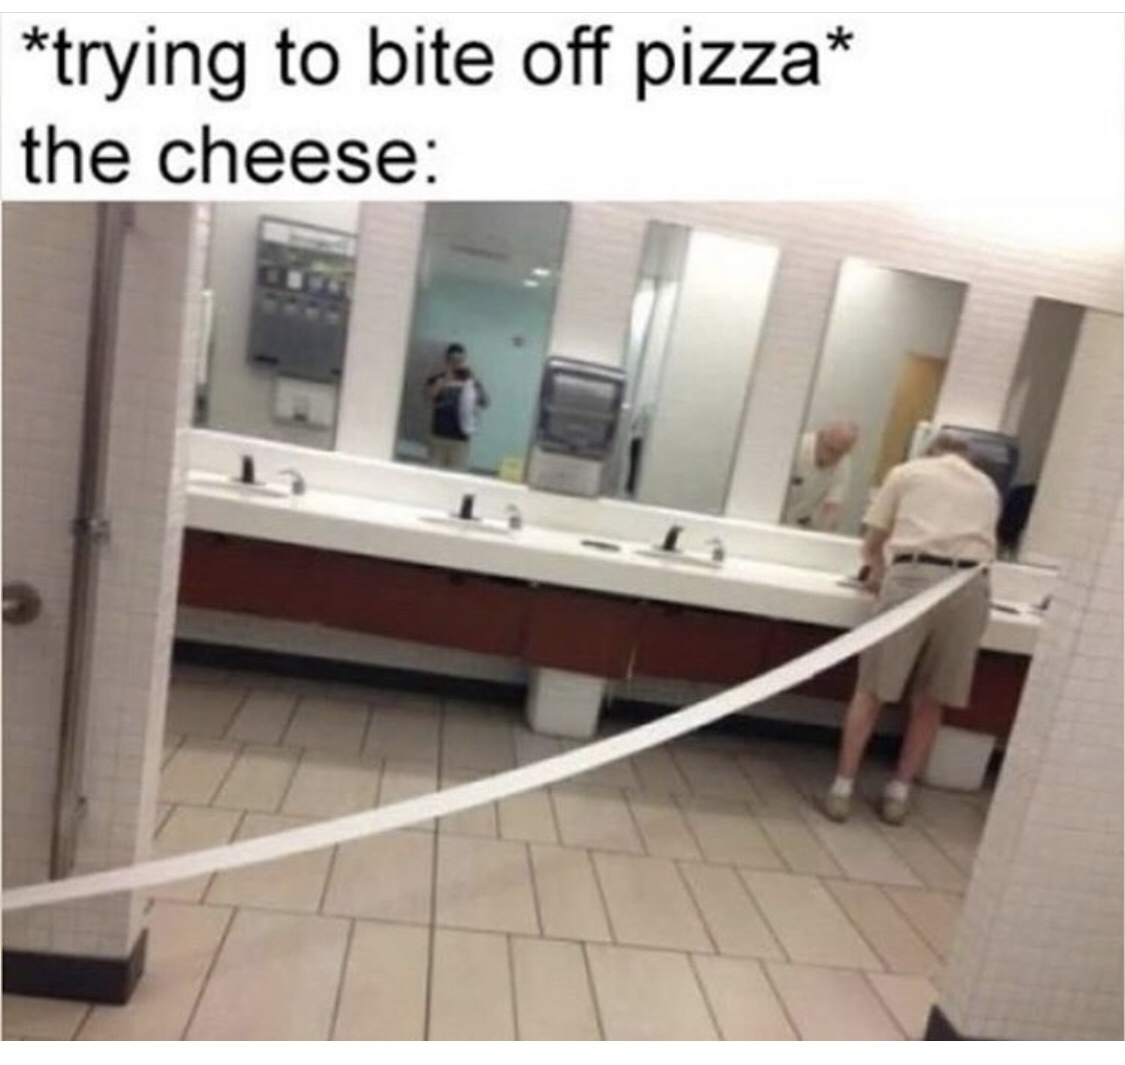 toilet paper tail - trying to bite off pizza the cheese